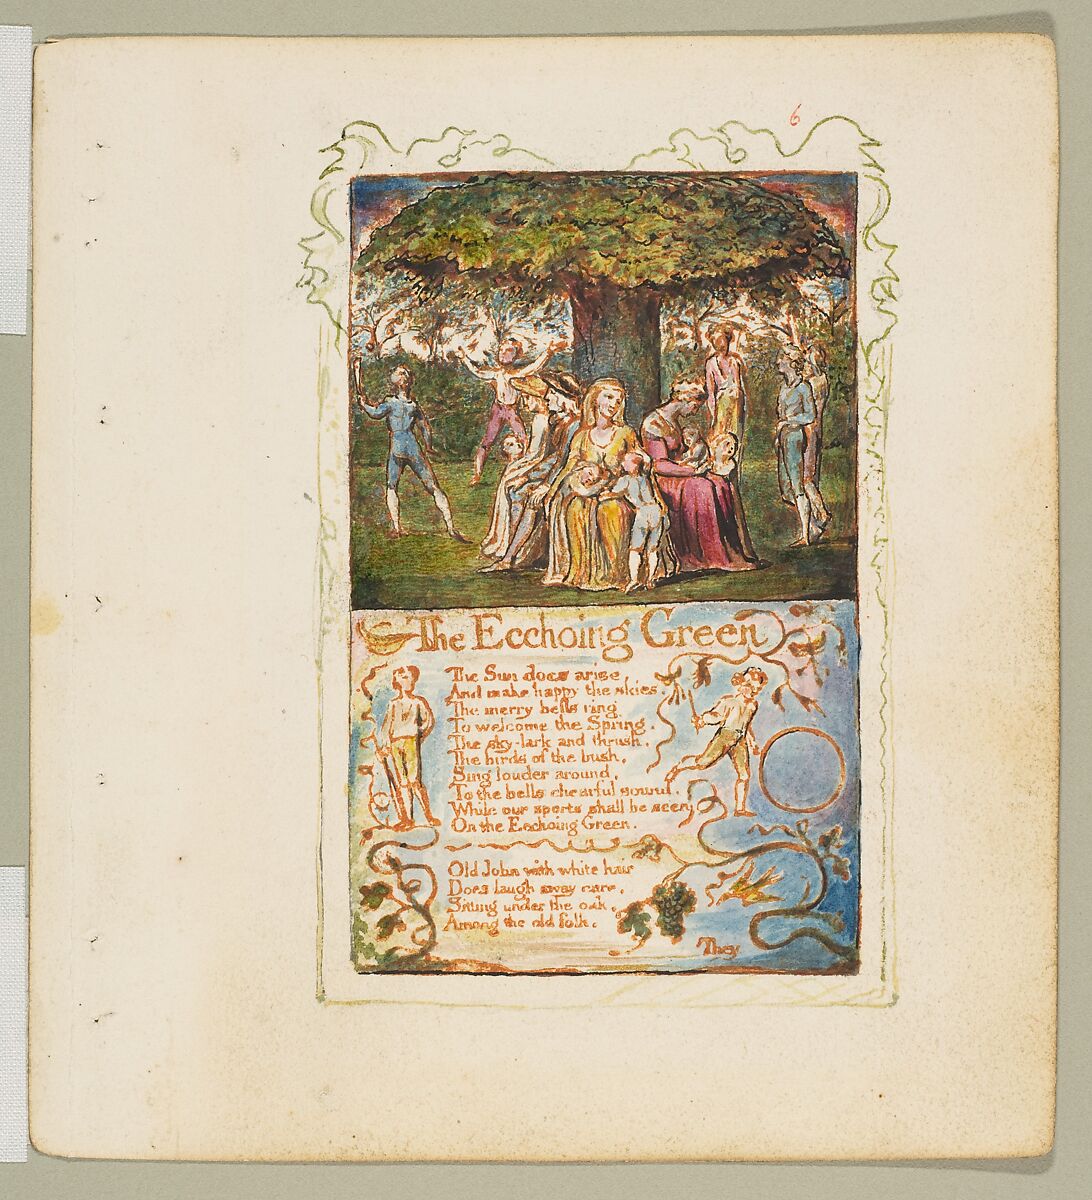 Songs of Innocence: The Ecchoing Green, William Blake, Relief etching printed in orange-brown ink and hand-colored with watercolor and shell gold